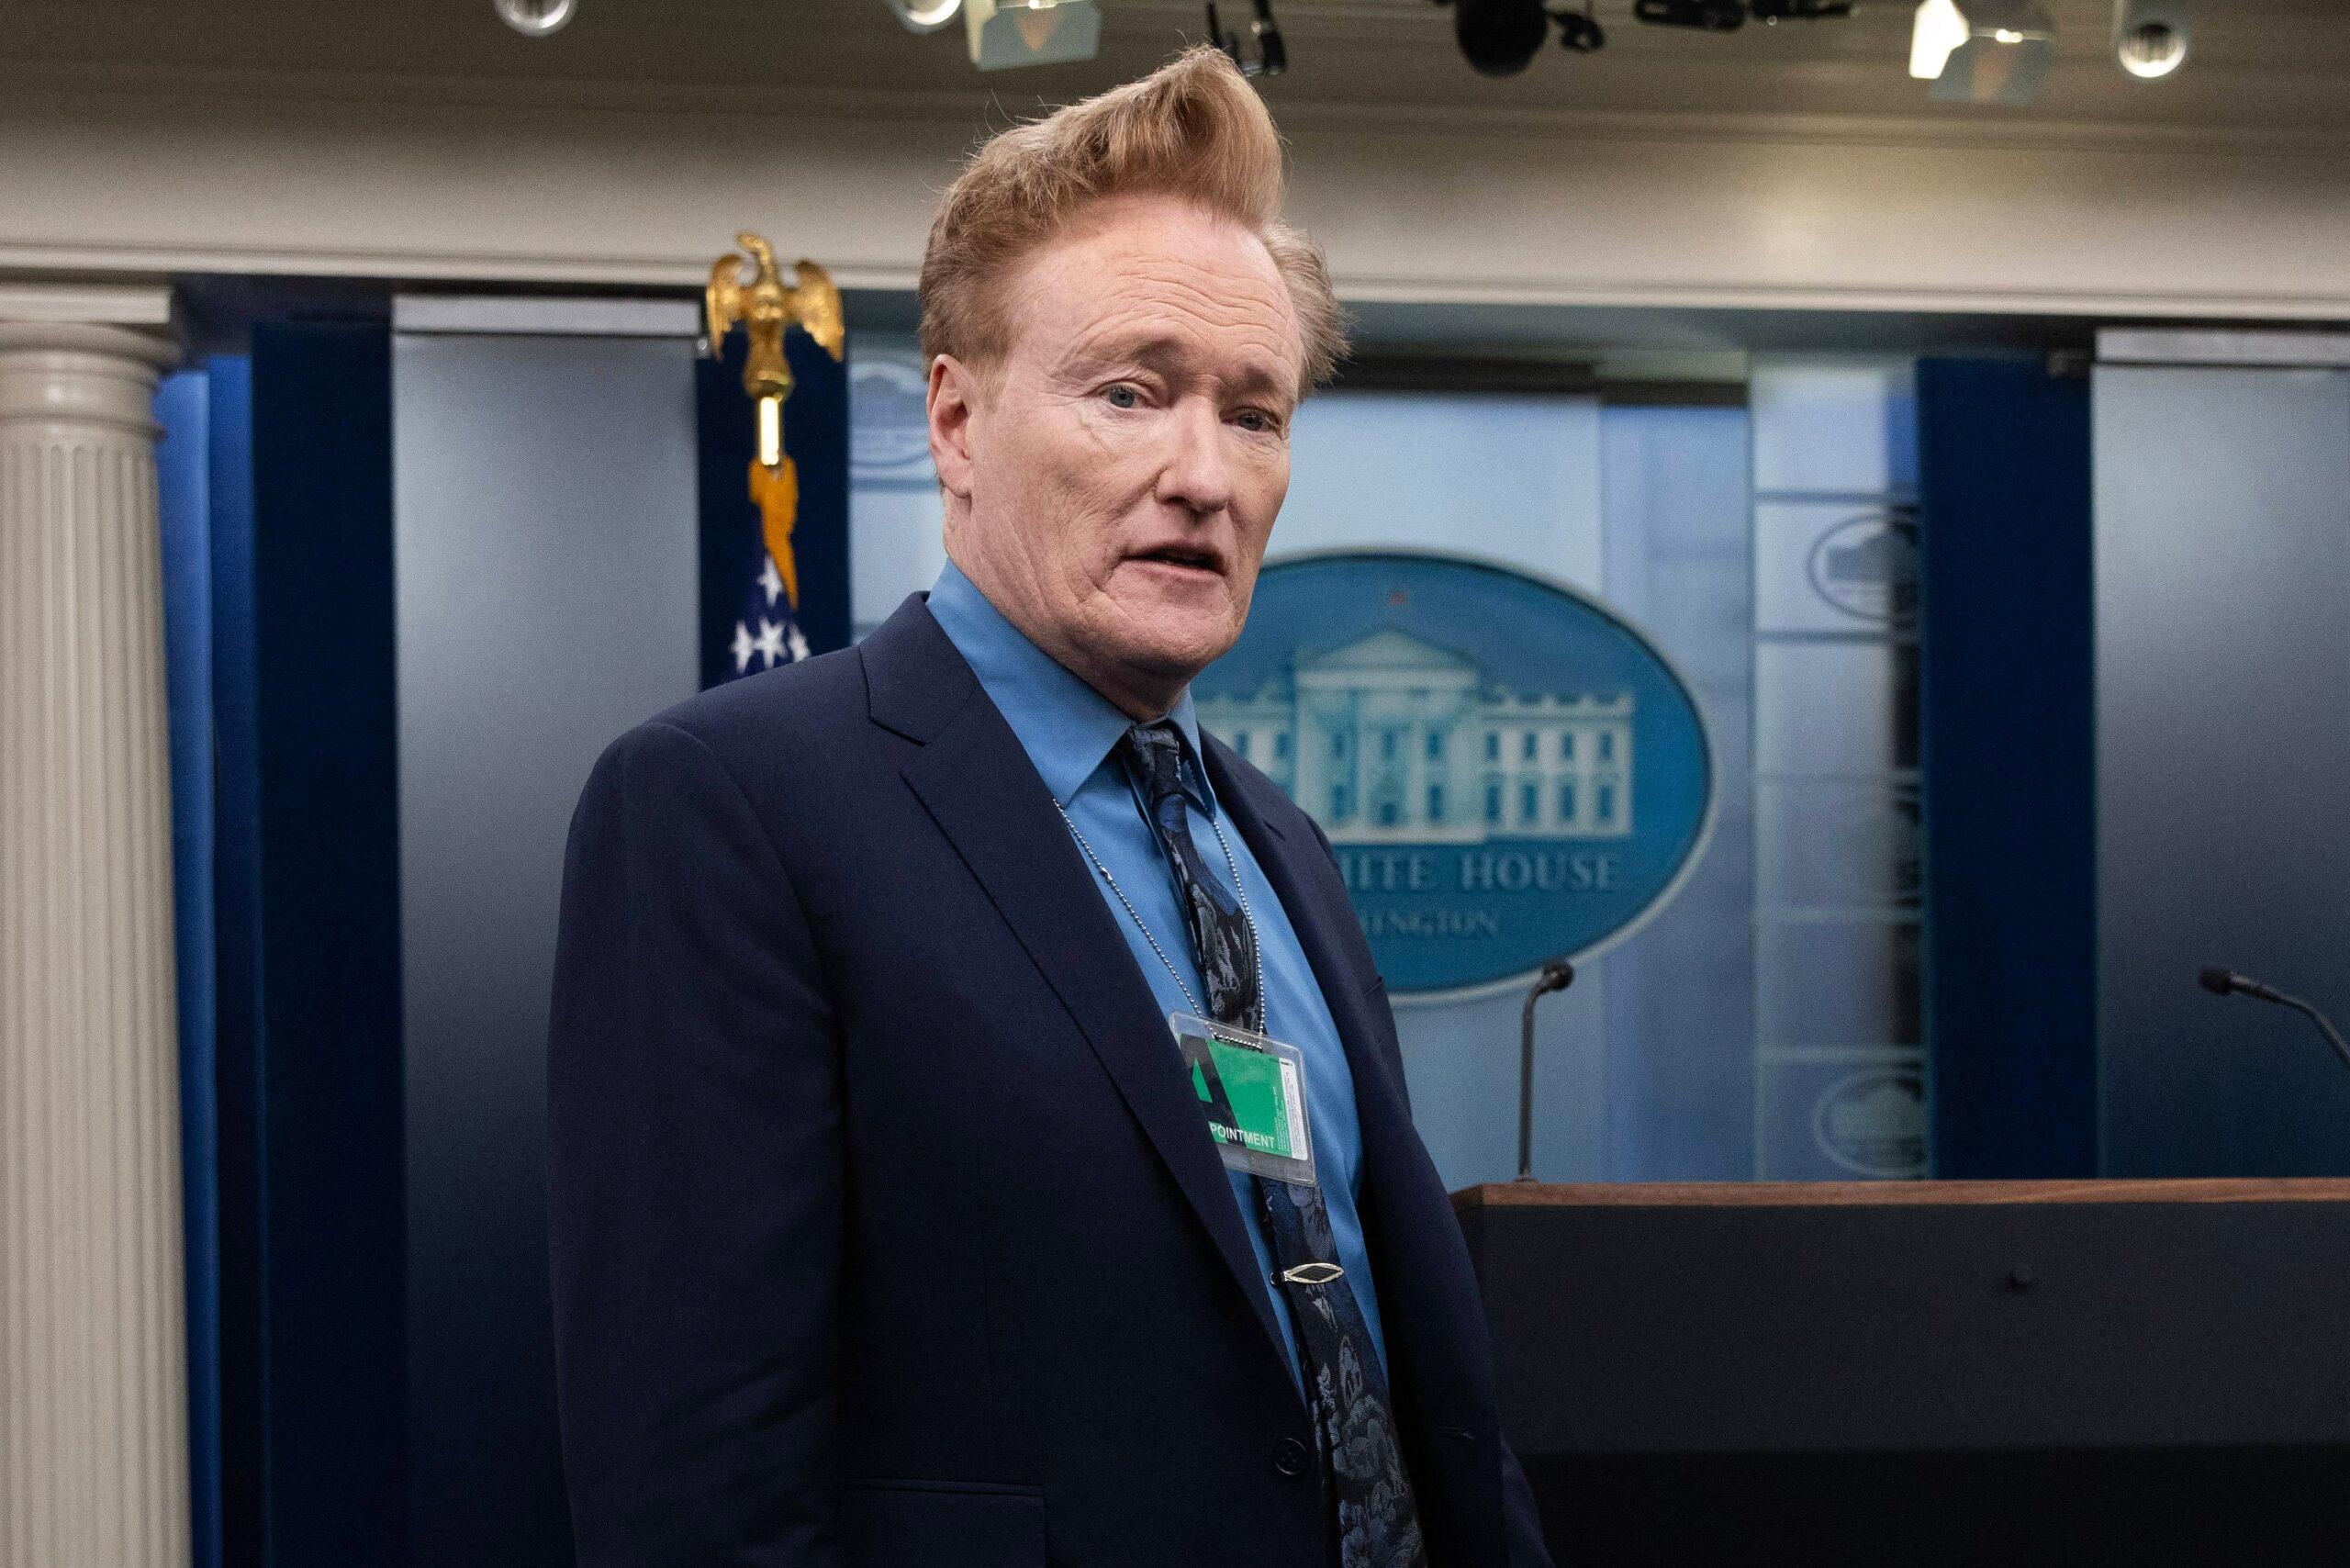 Conan O'Brien Fired From 'The Tonight Show'